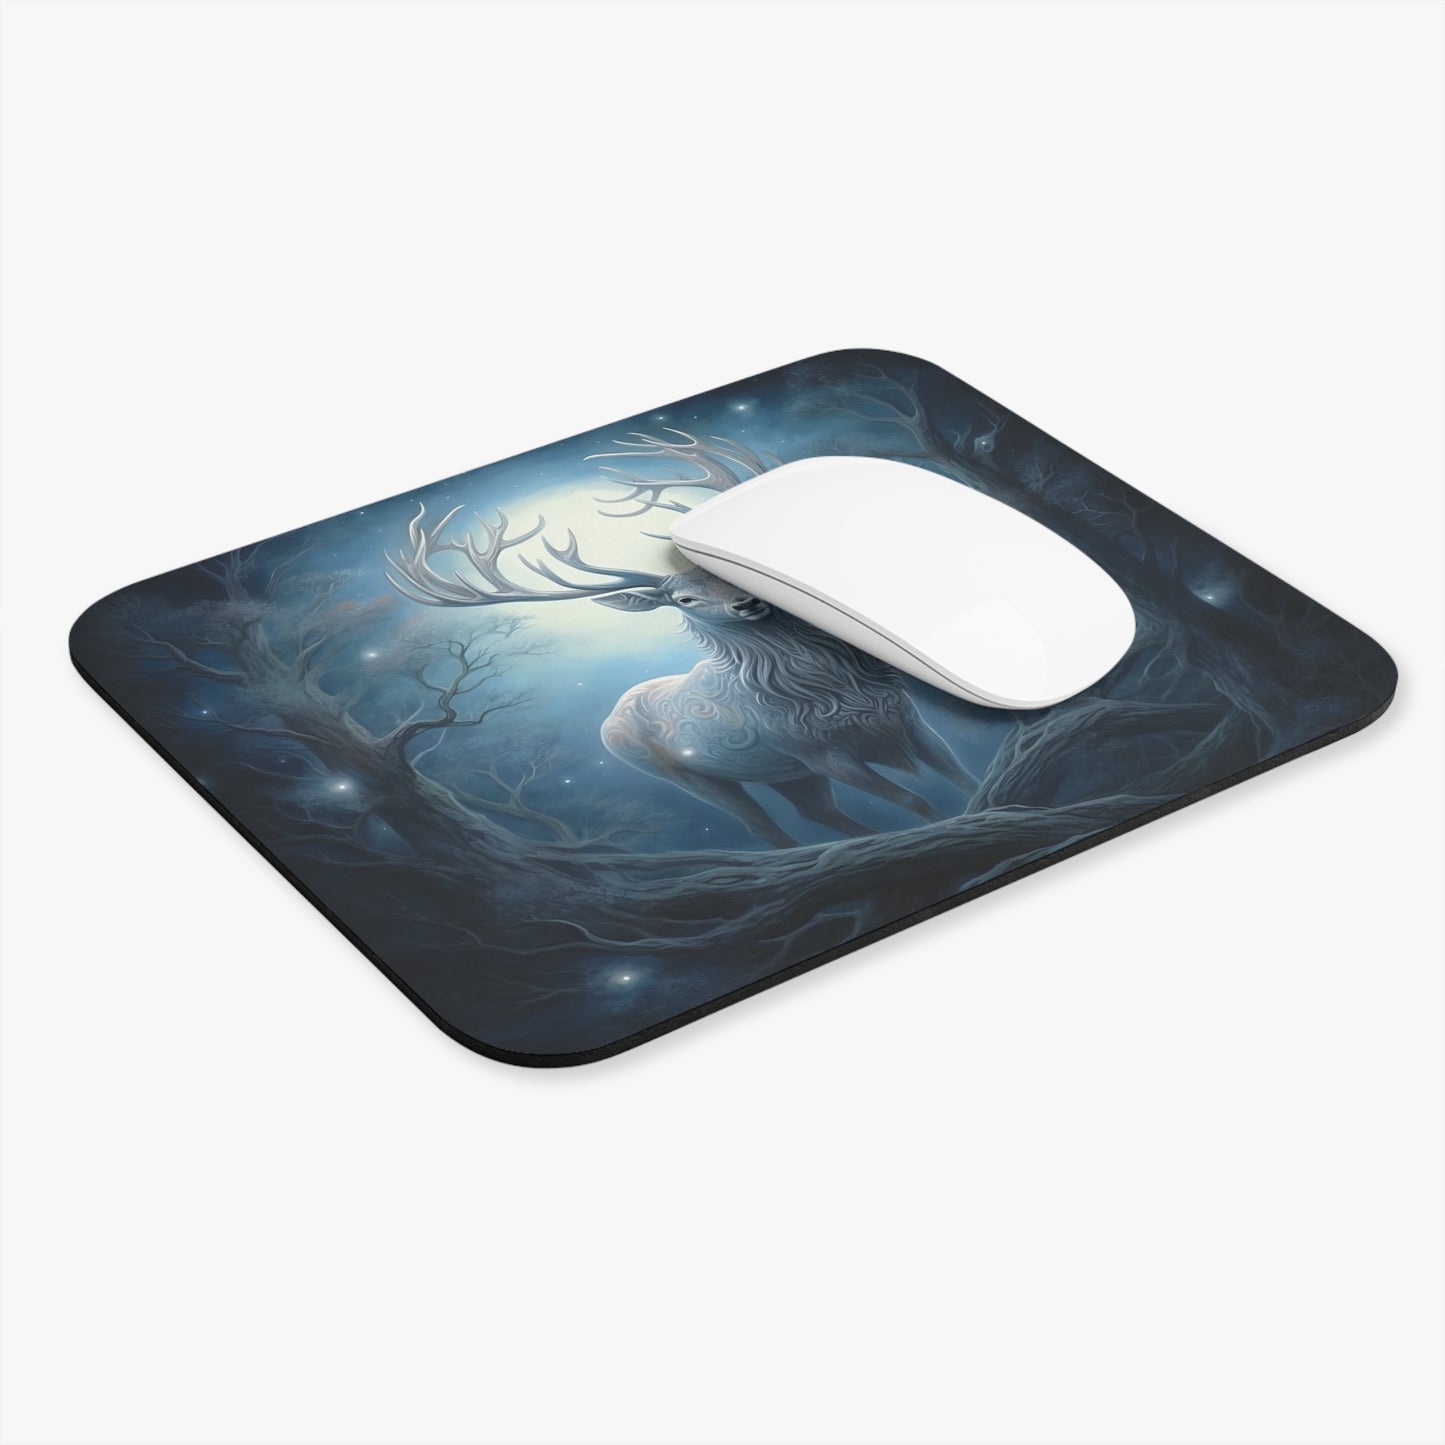 White Deer - Mouse Pad